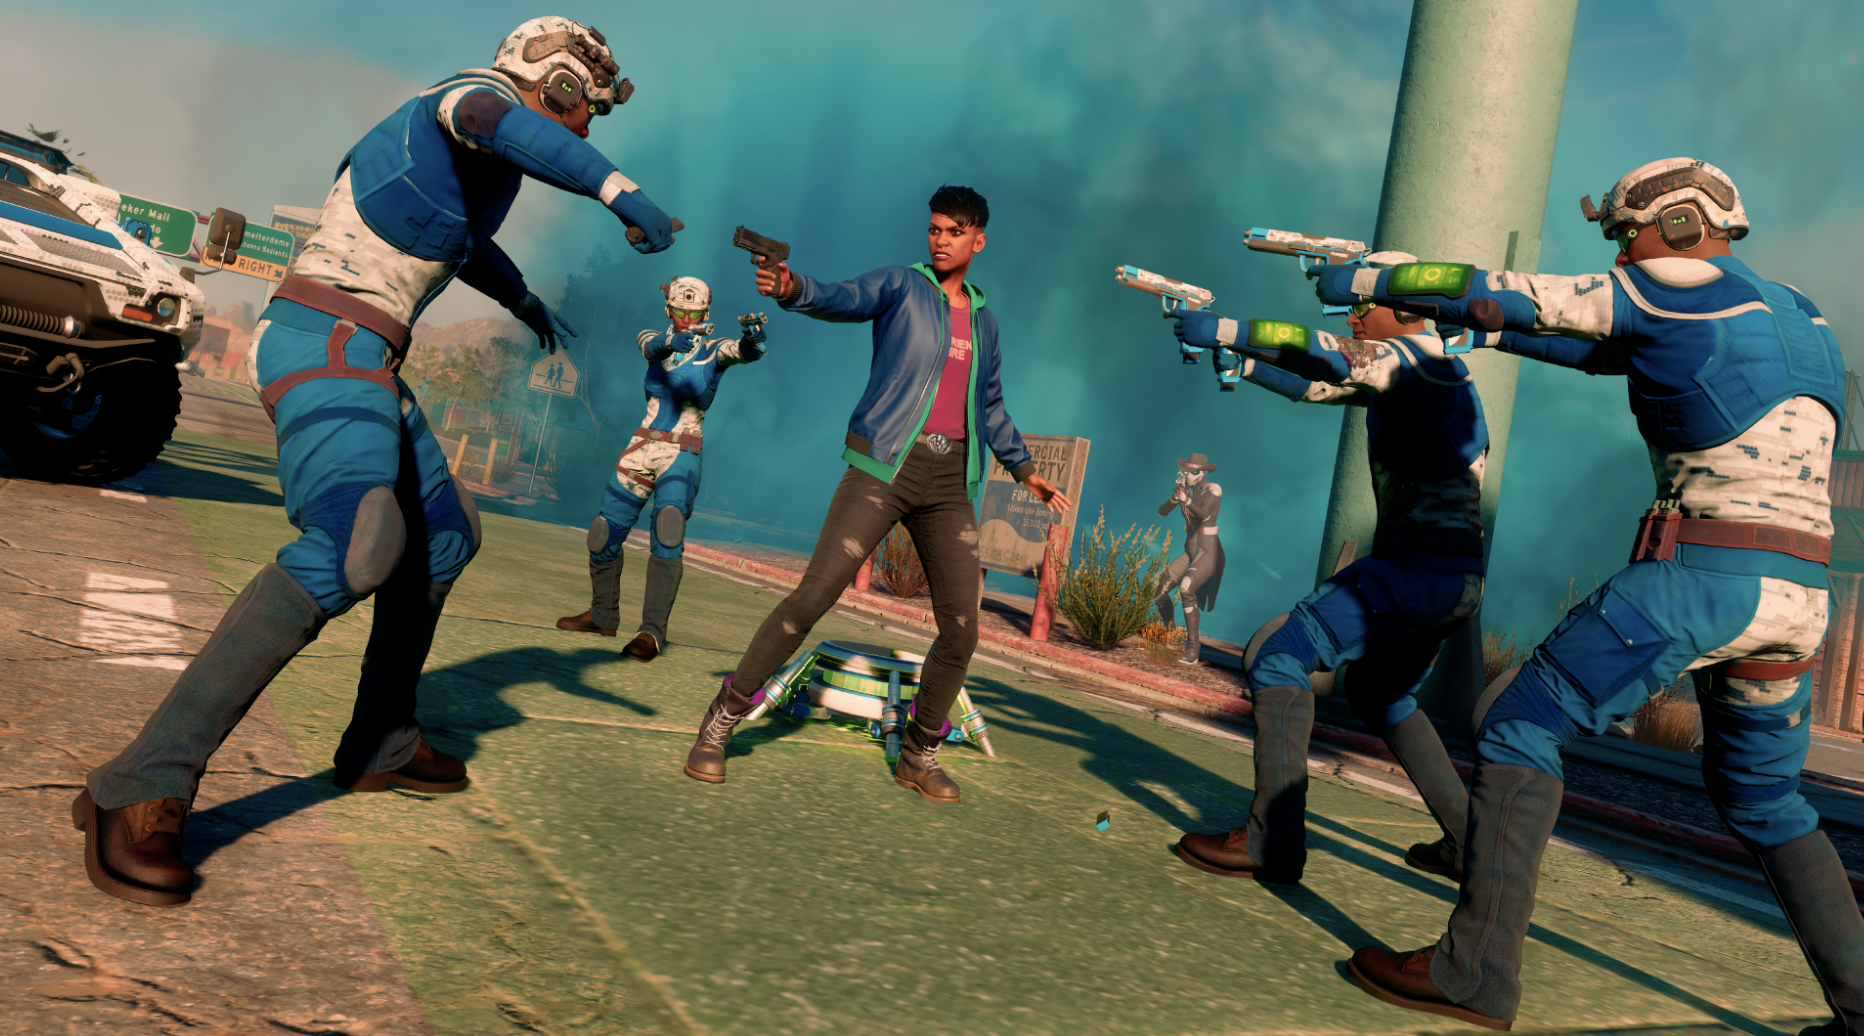 'Saints Row' Hands-On Preview Left Us Feeling Very Impressed